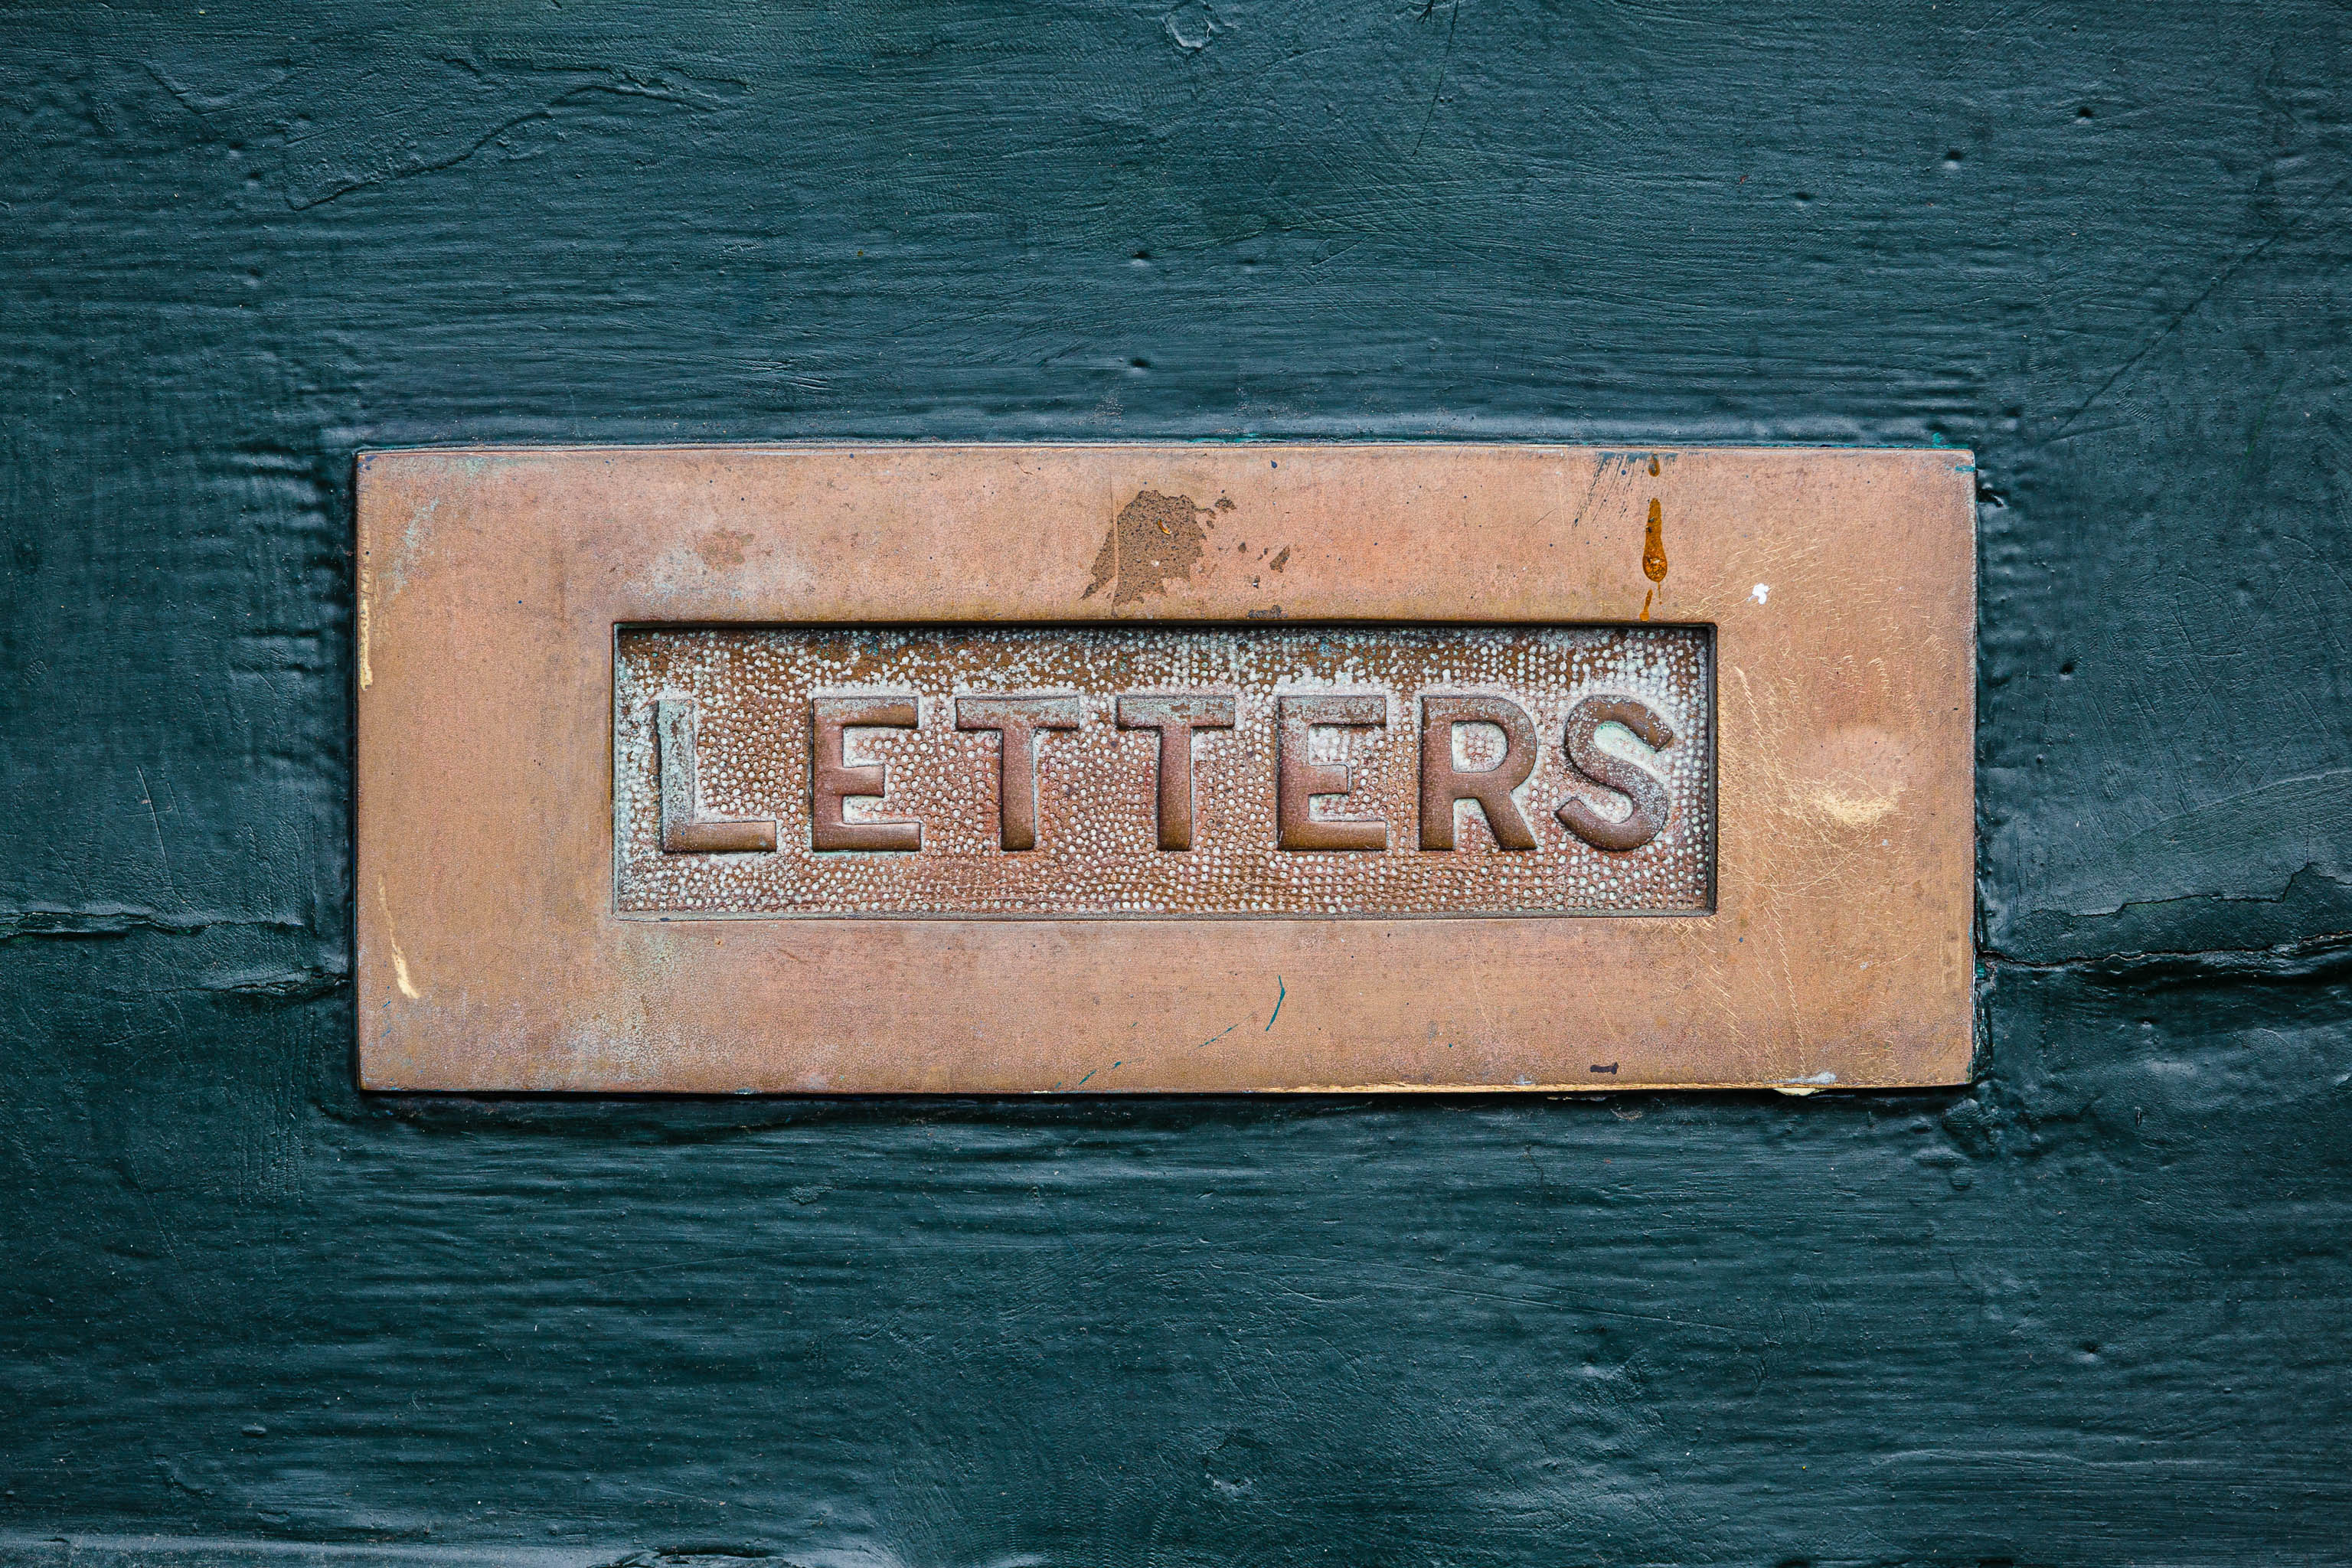 LETTERS
I'm always a sucker for a letterbox with LETTERS written on it.
